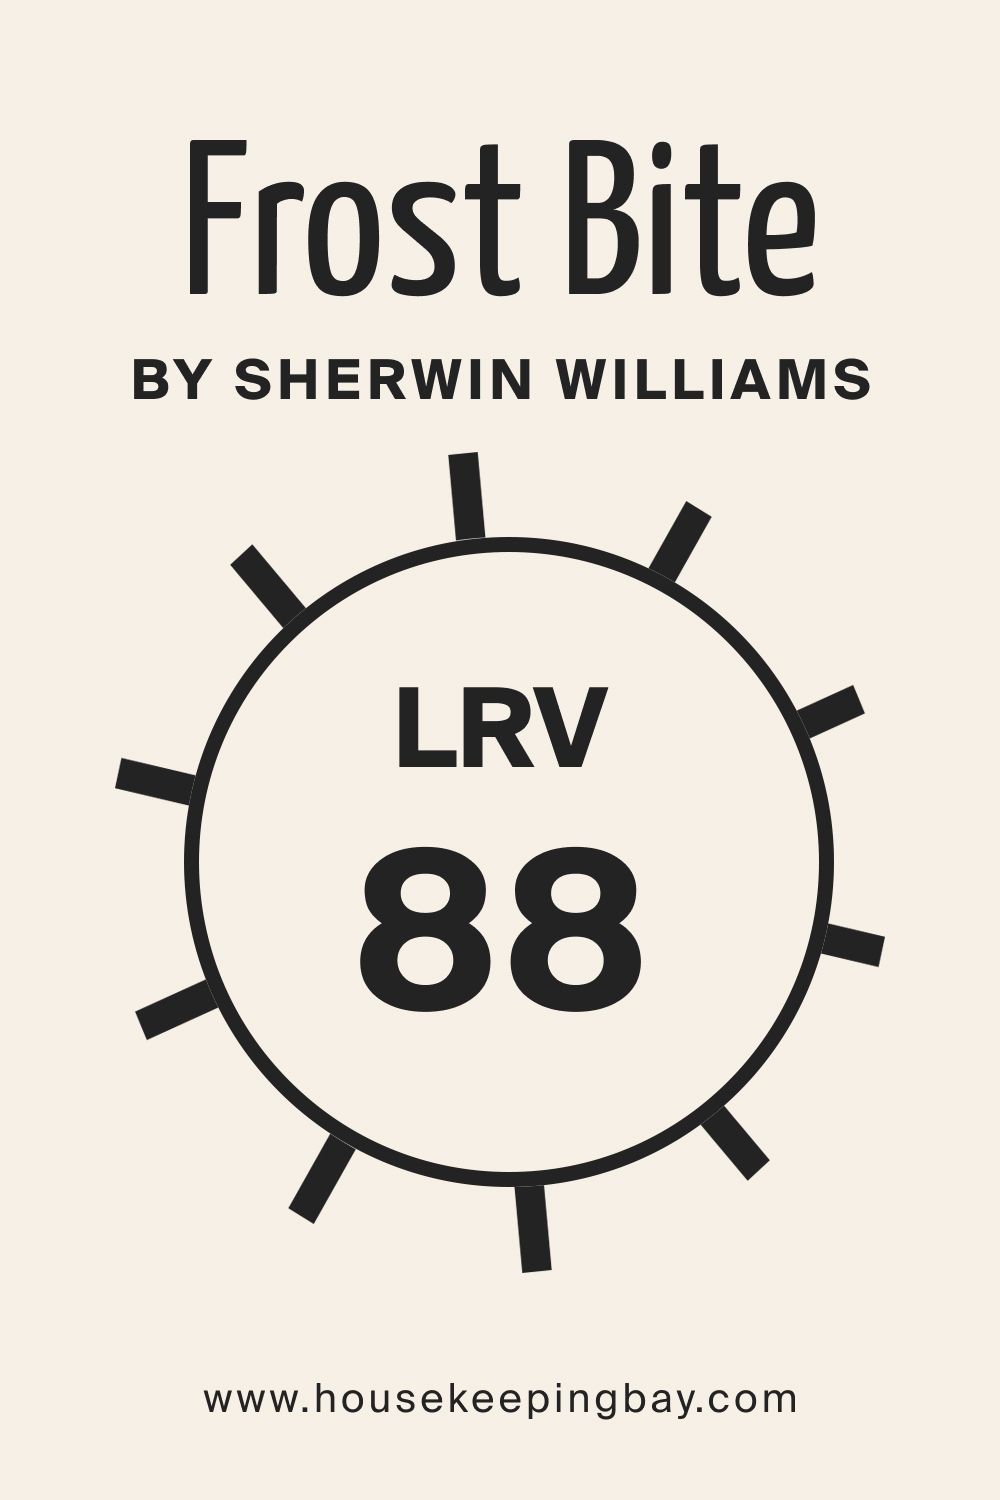 SW 9505 Frost Bite by Sherwin Williams. LRV 88